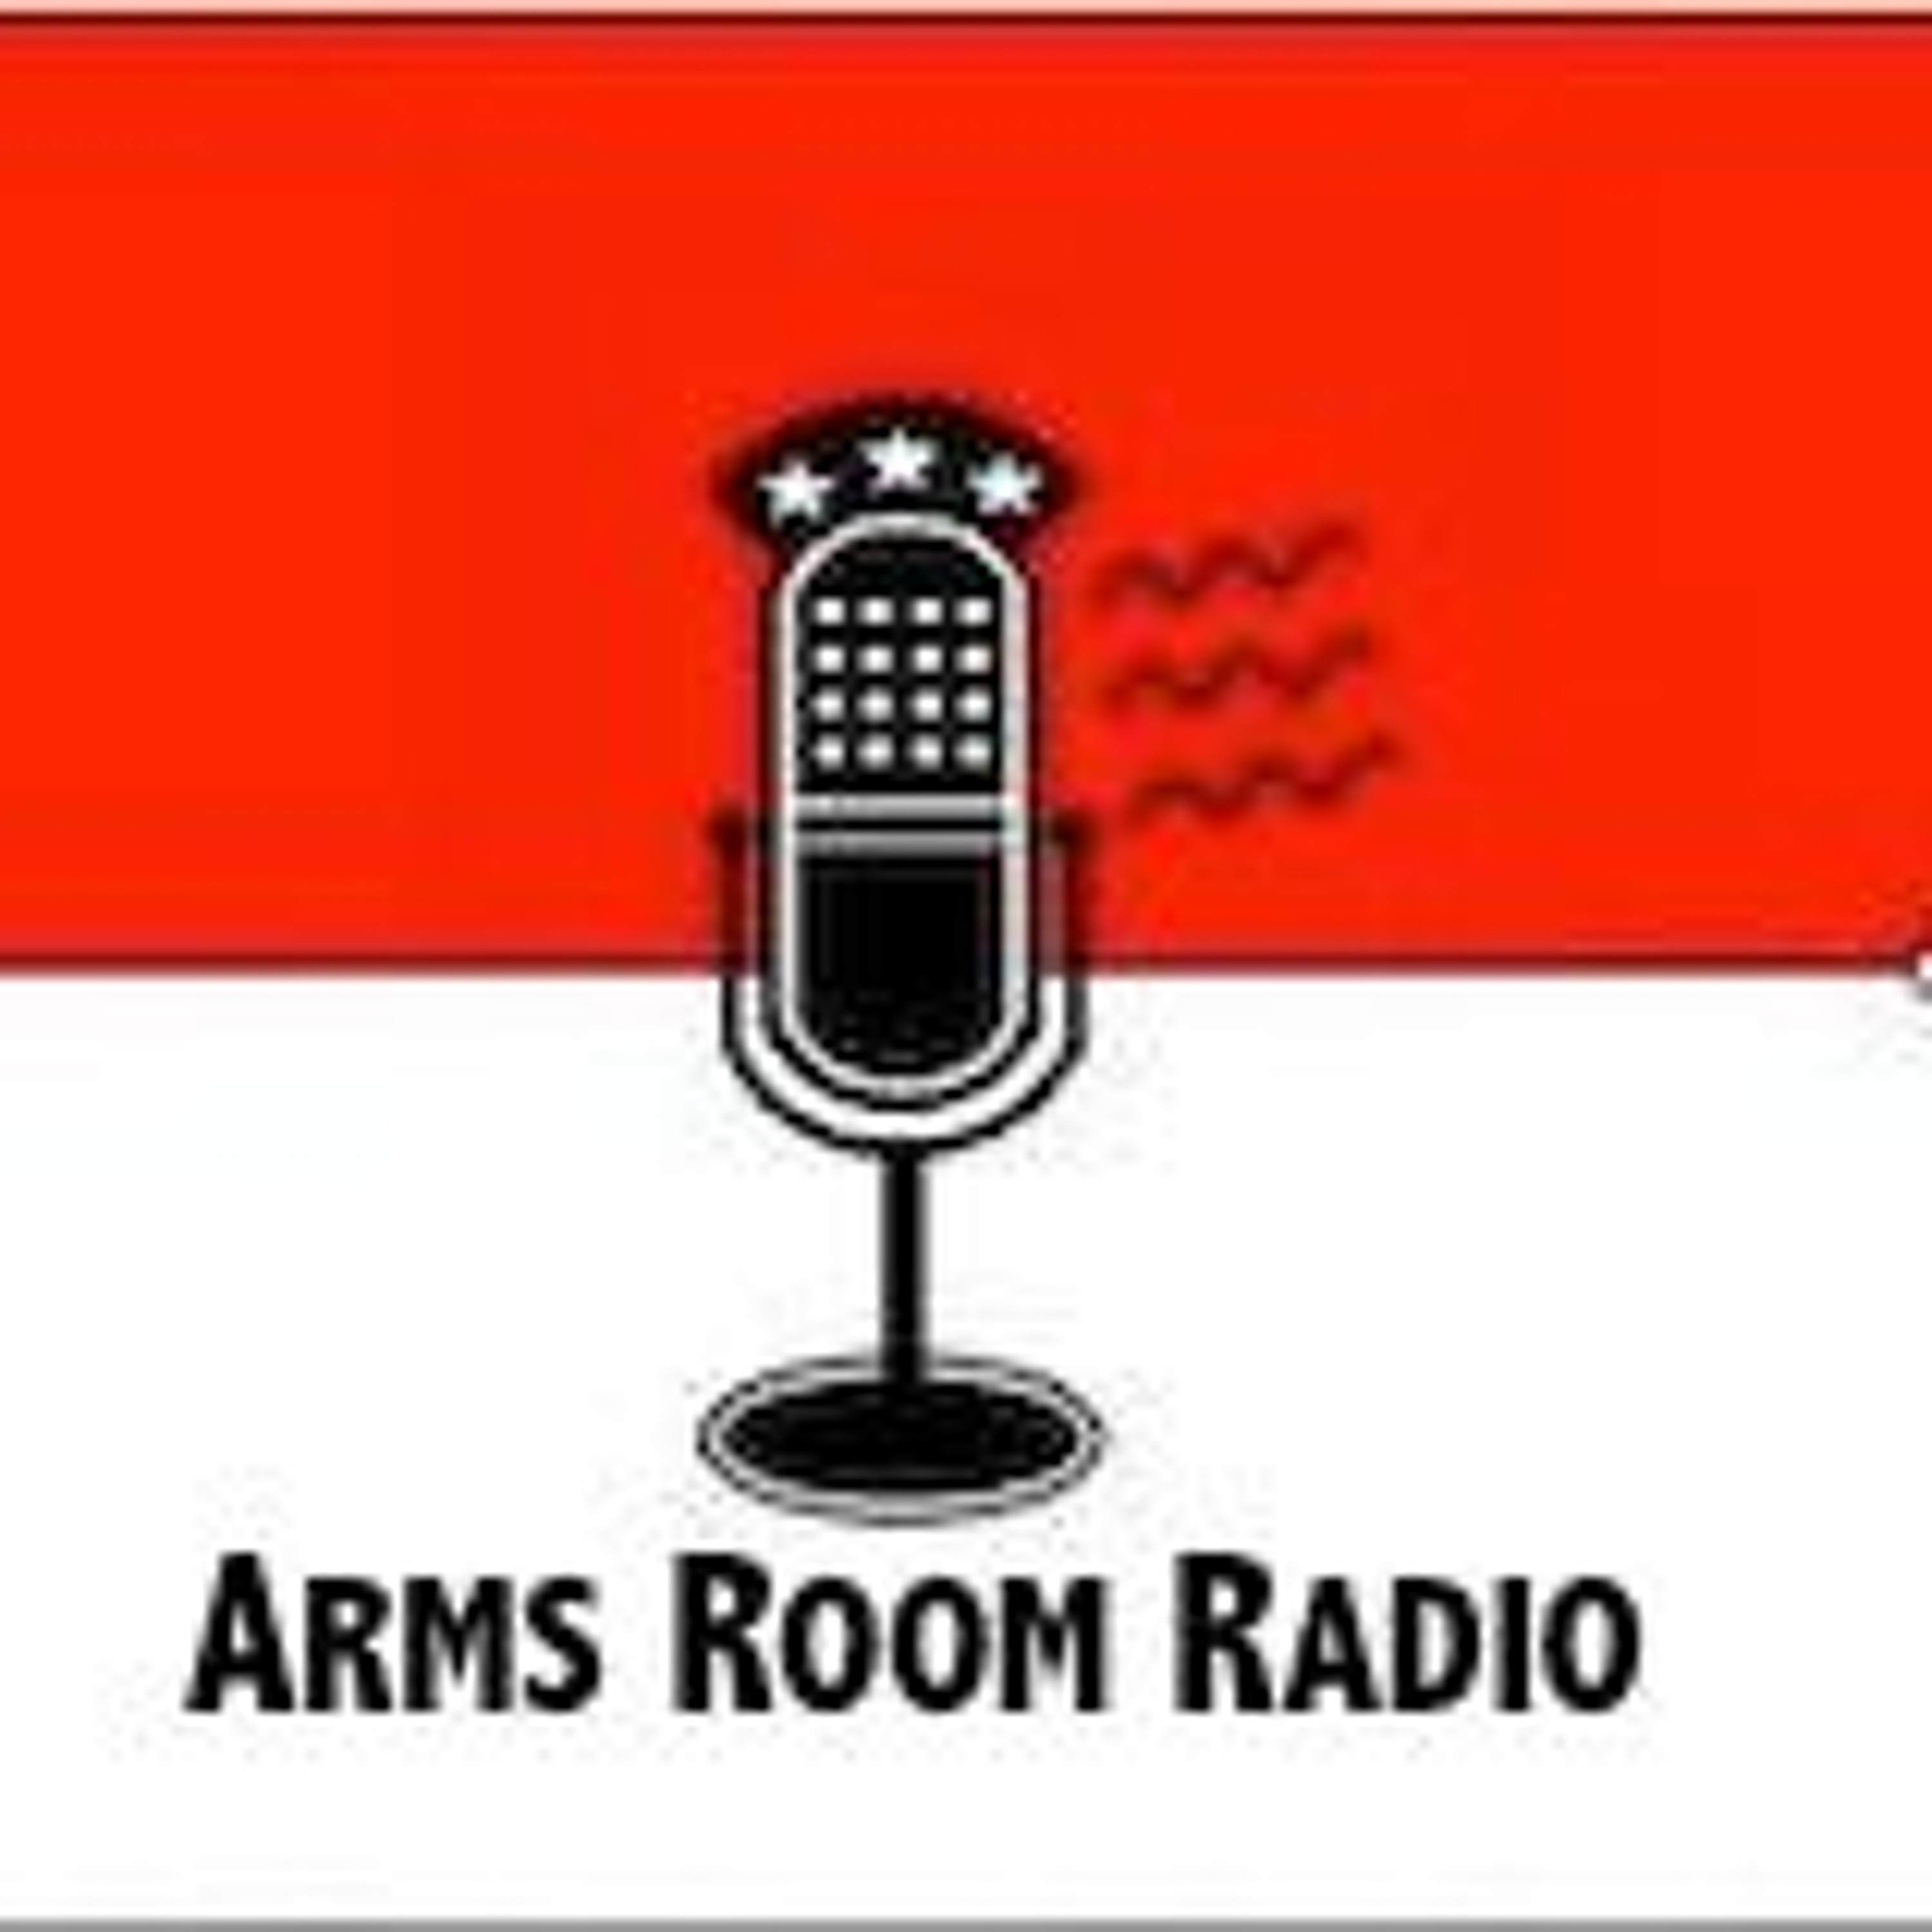 ArmsRoomRadio 10.14.23 Magnet from Lion Arms